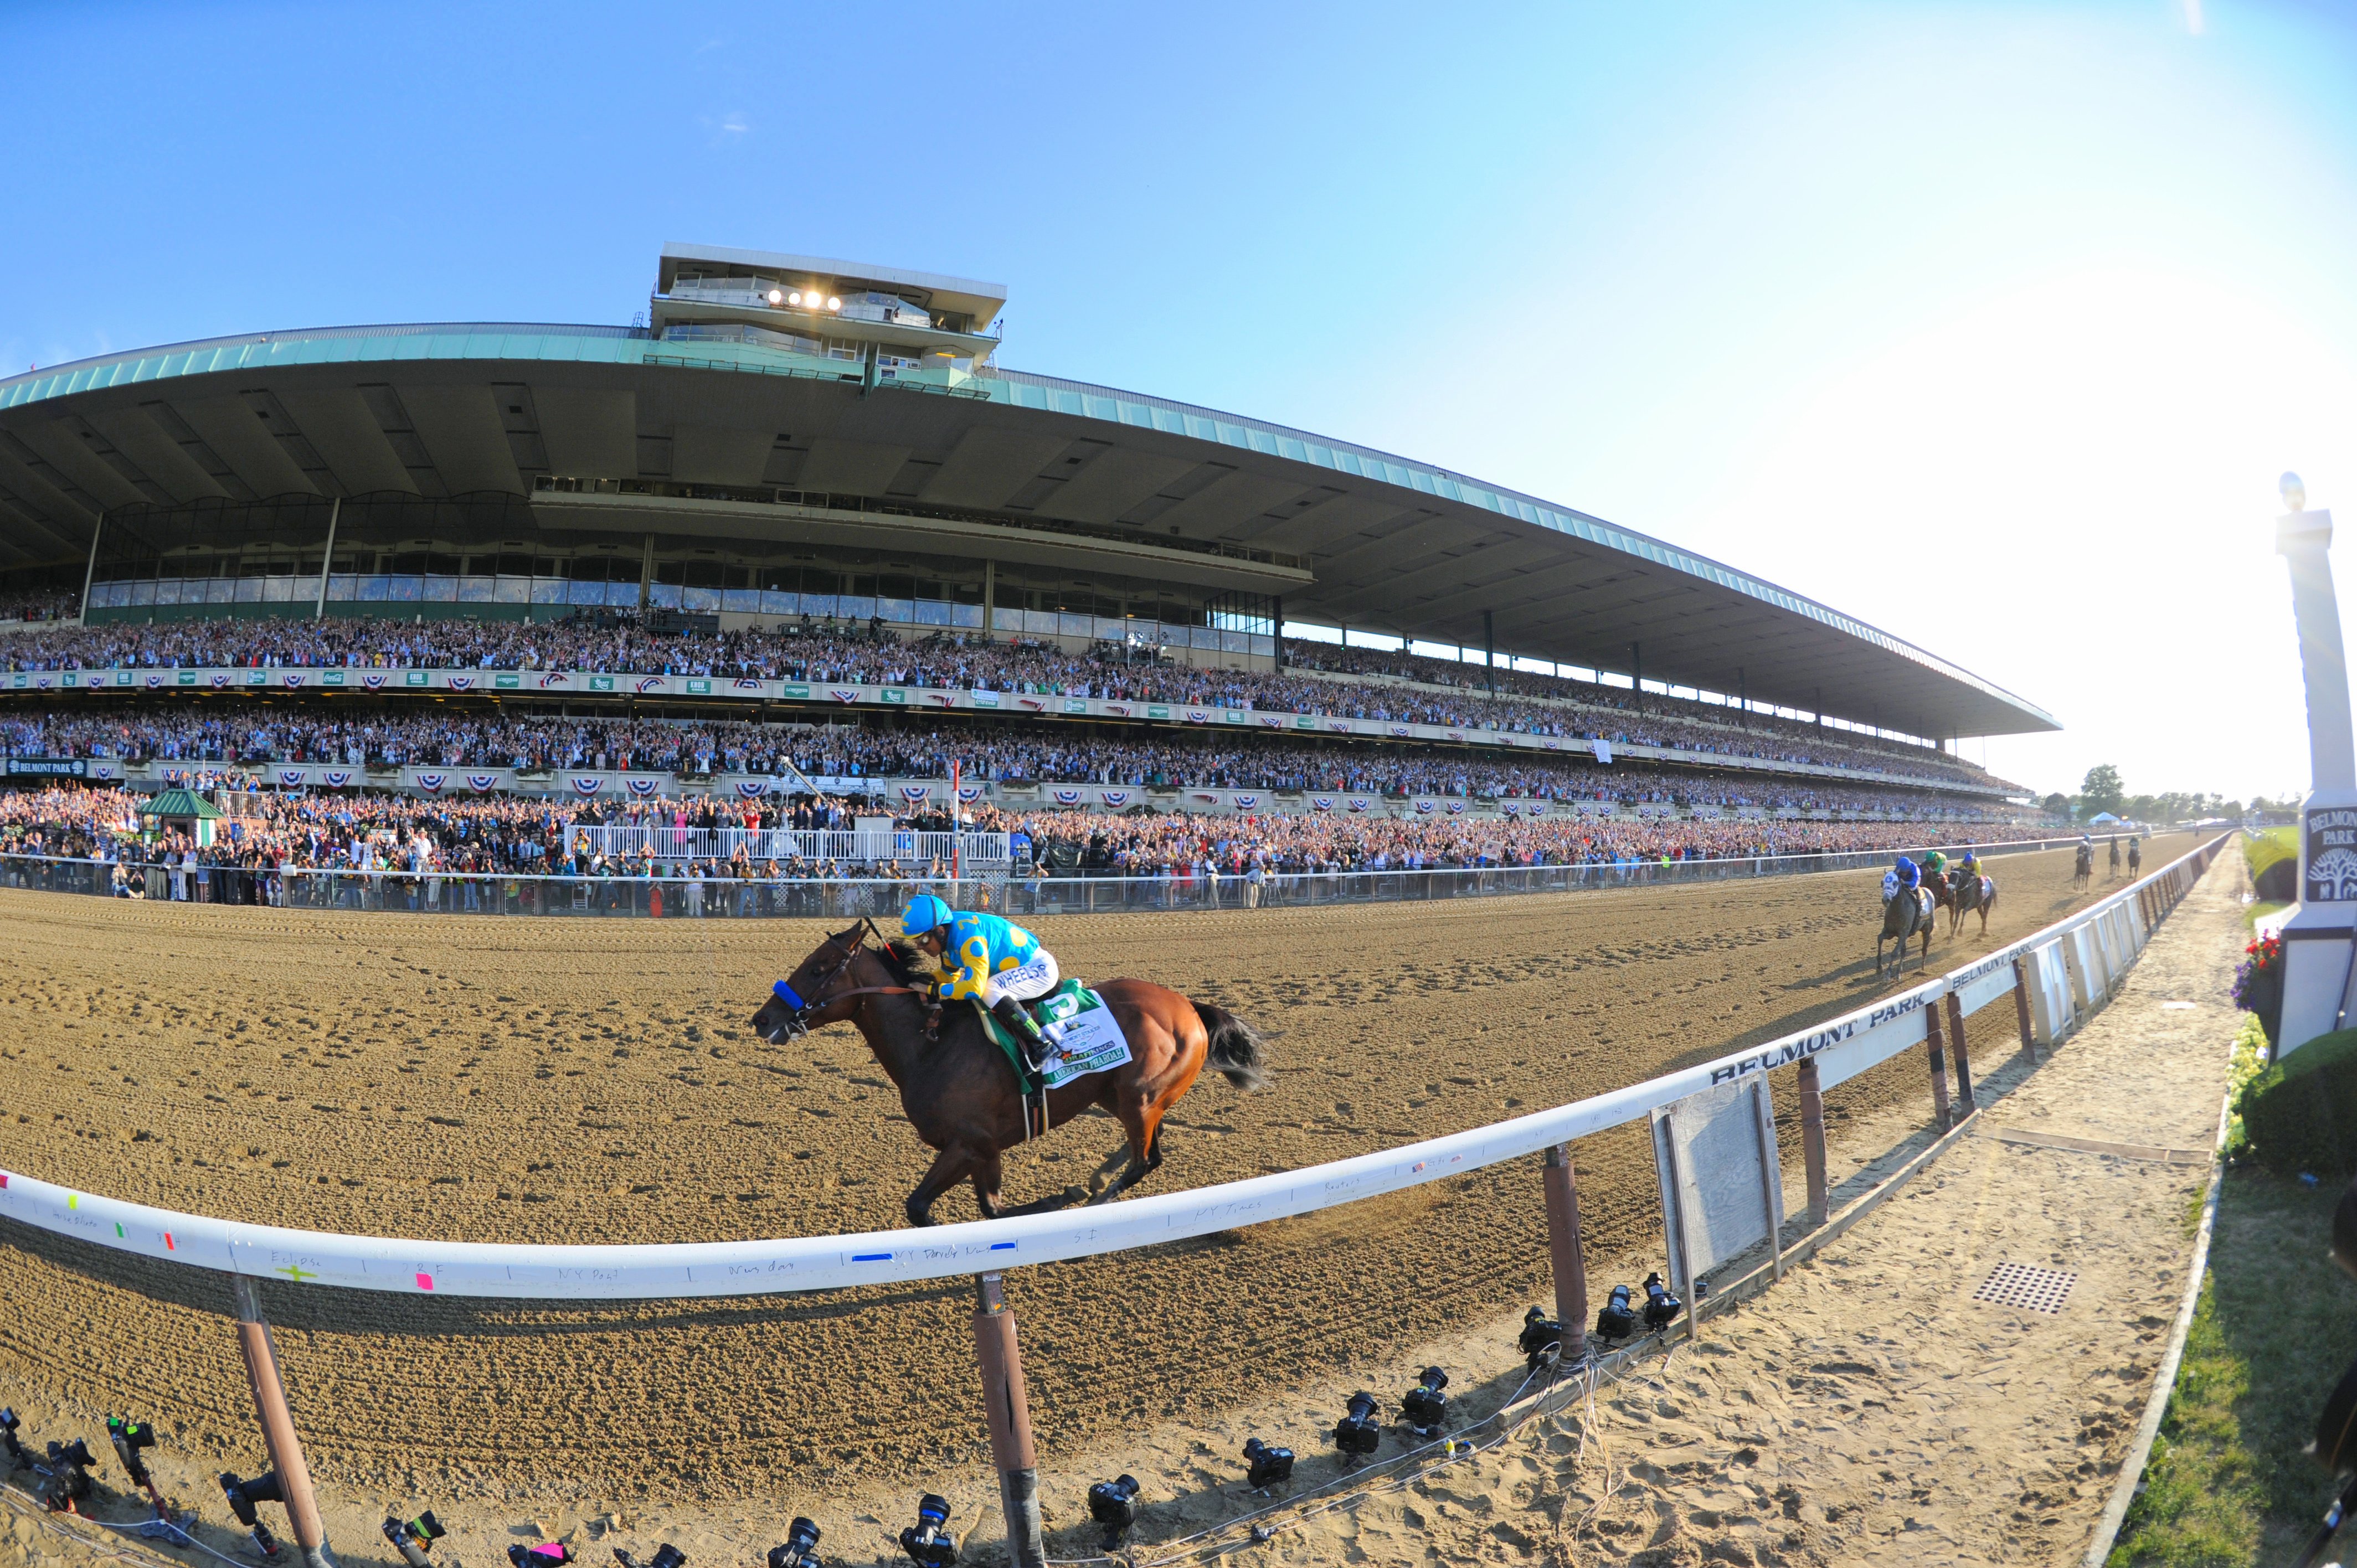 American Pharoah, Victor Espinoza up, winning the 2015 Belmont Stakes to become America's 12th Triple Crown winner (NYRA)